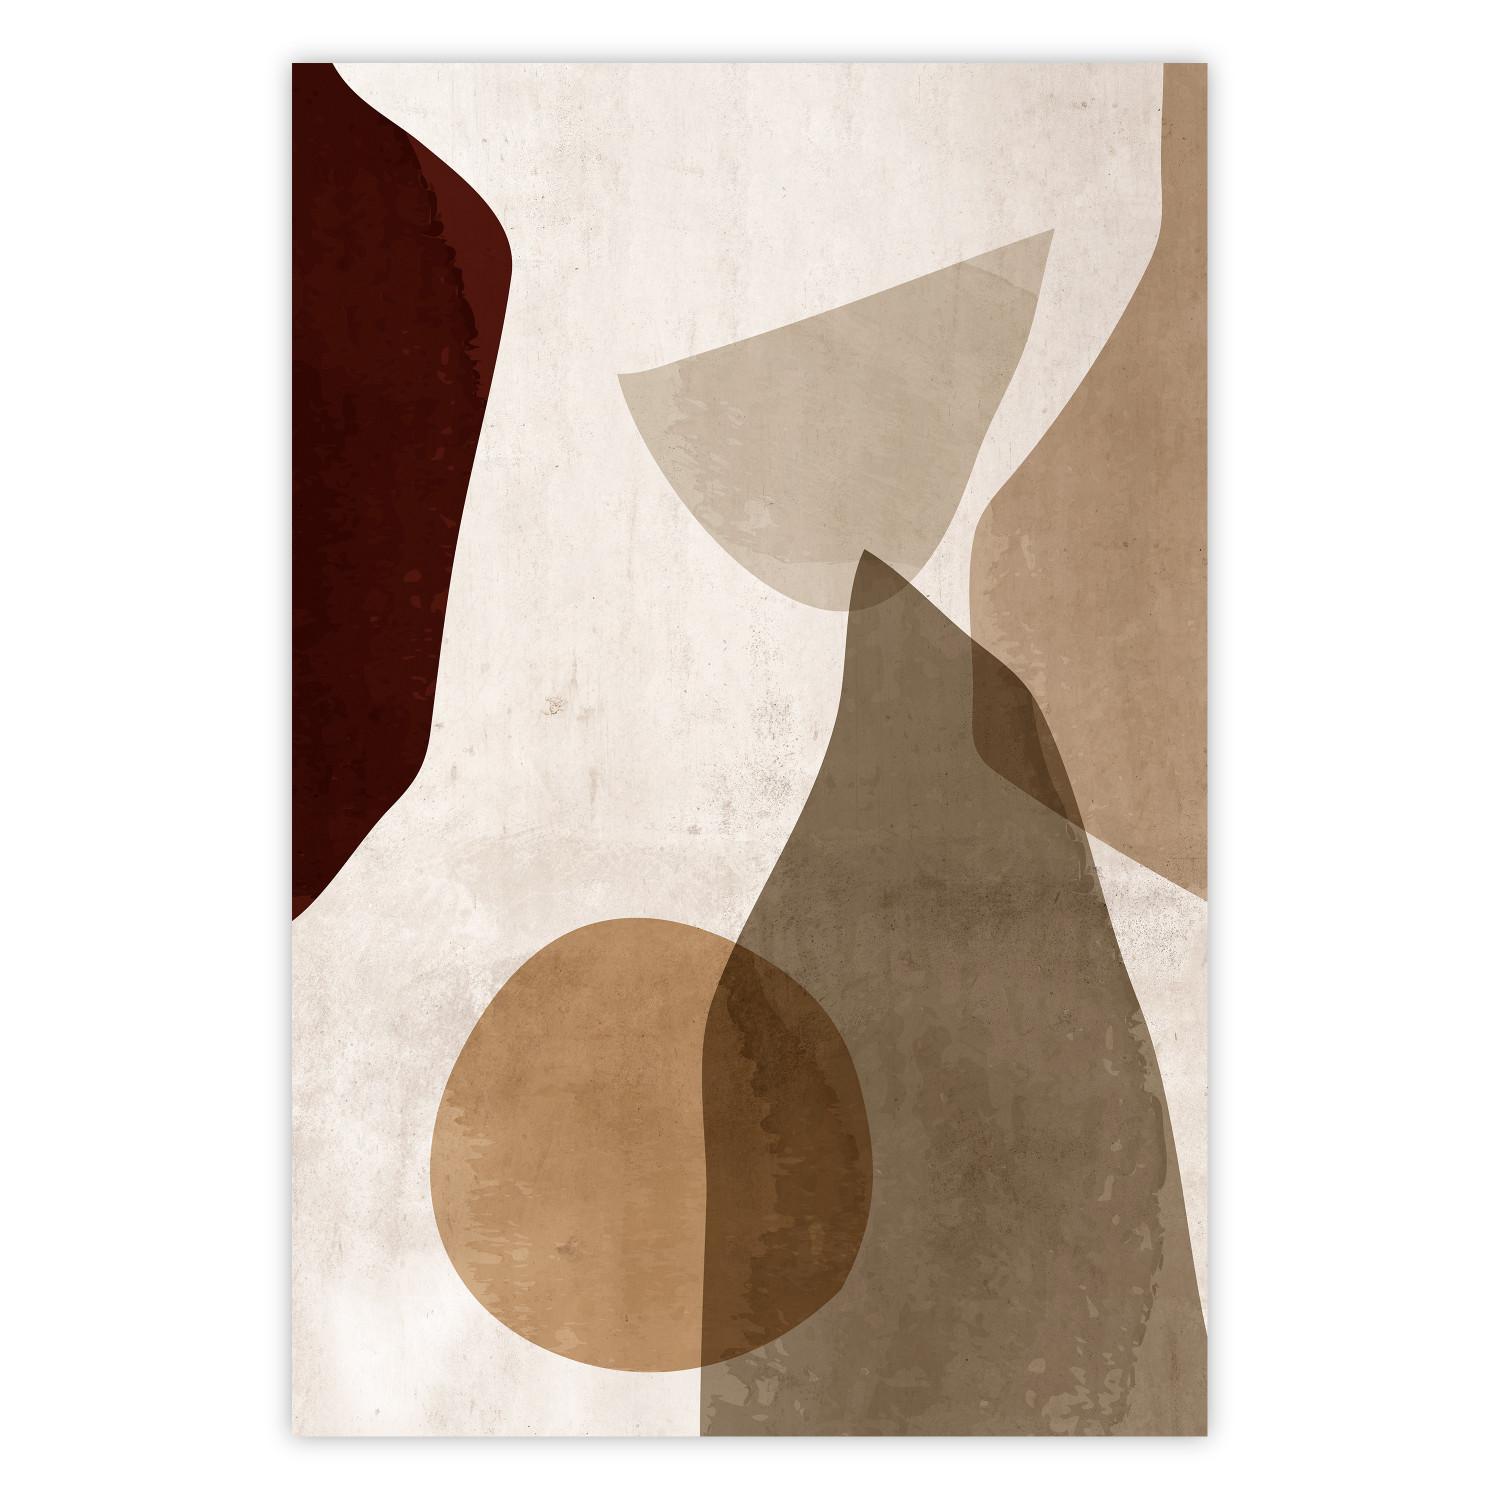 Poster Autumn Shuffle - composition of abstract geometric figures